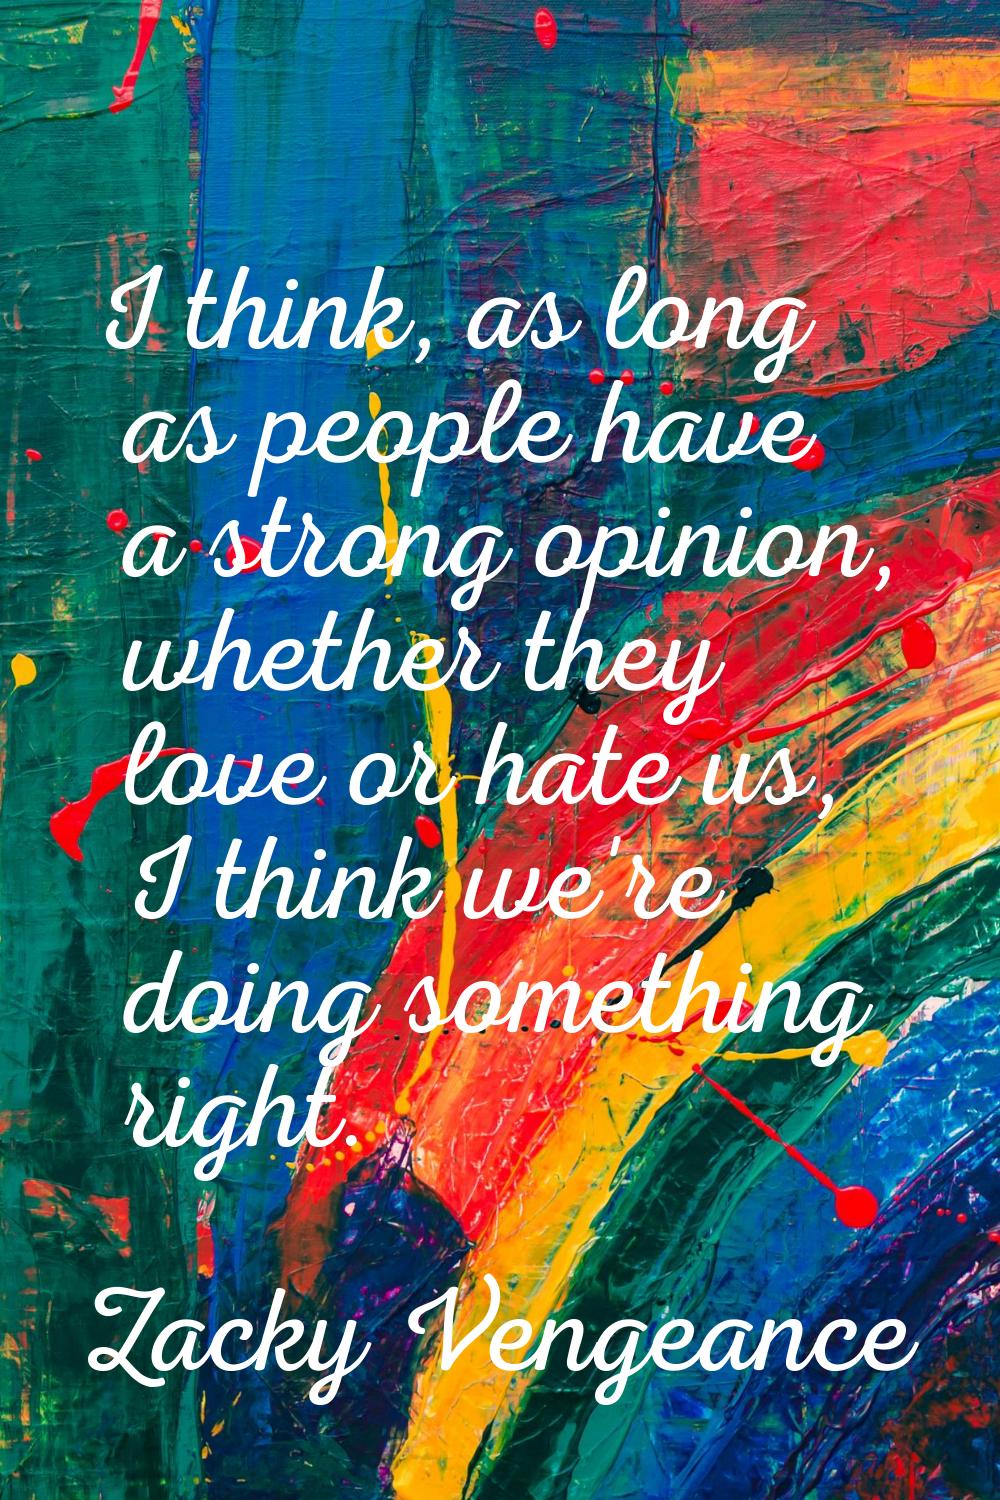 I think, as long as people have a strong opinion, whether they love or hate us, I think we're doing